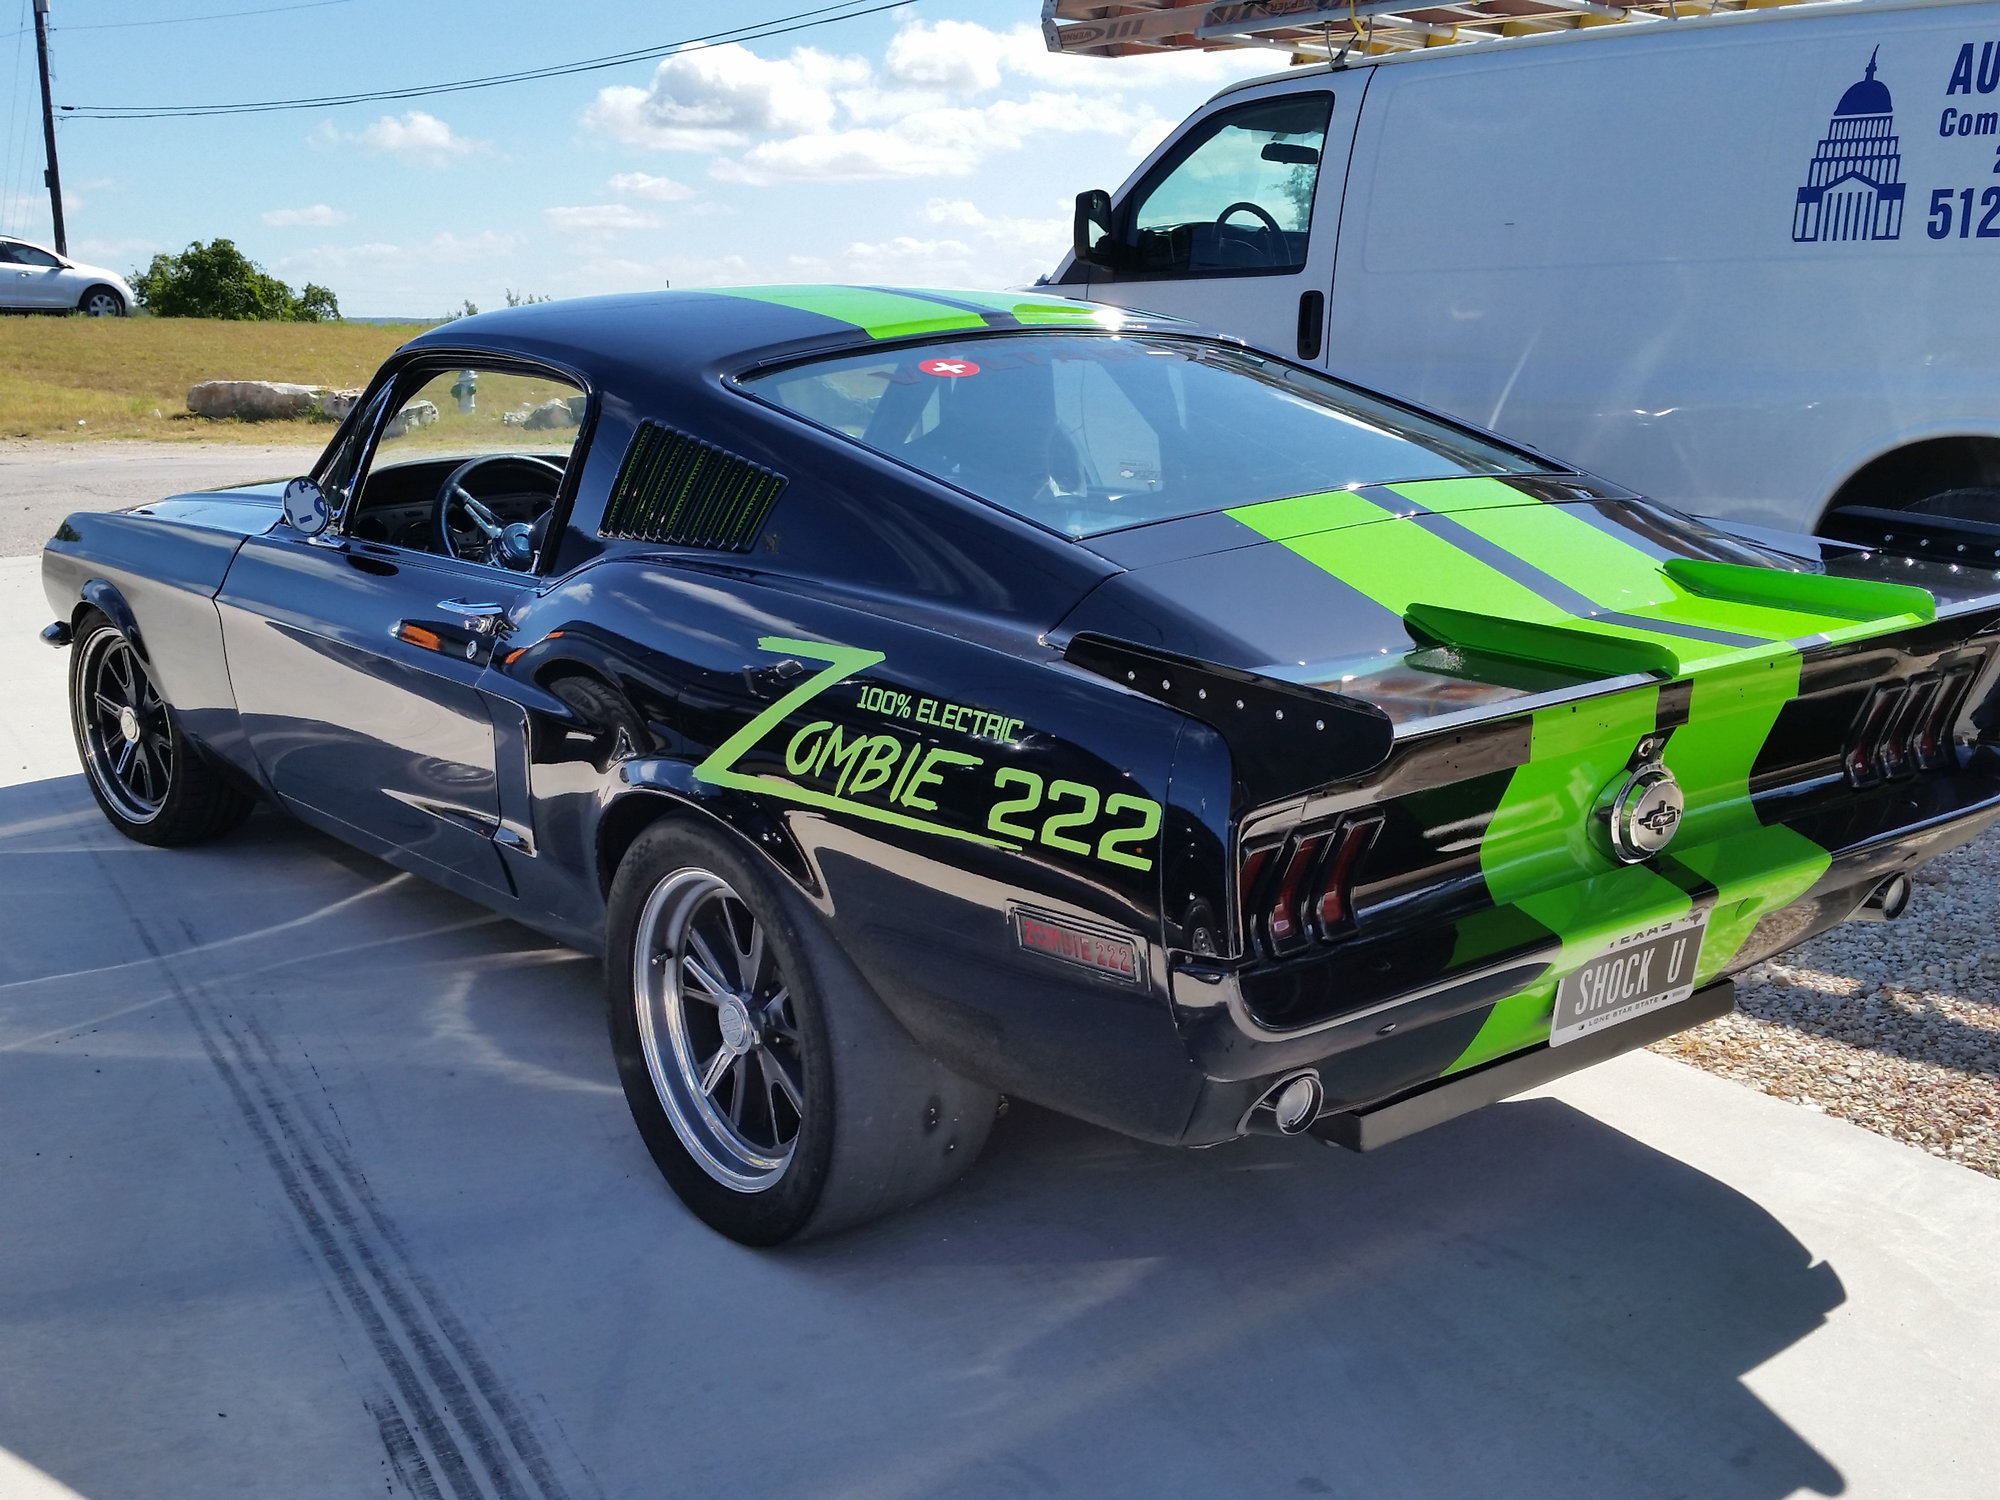 The zombie 222 electric mustang